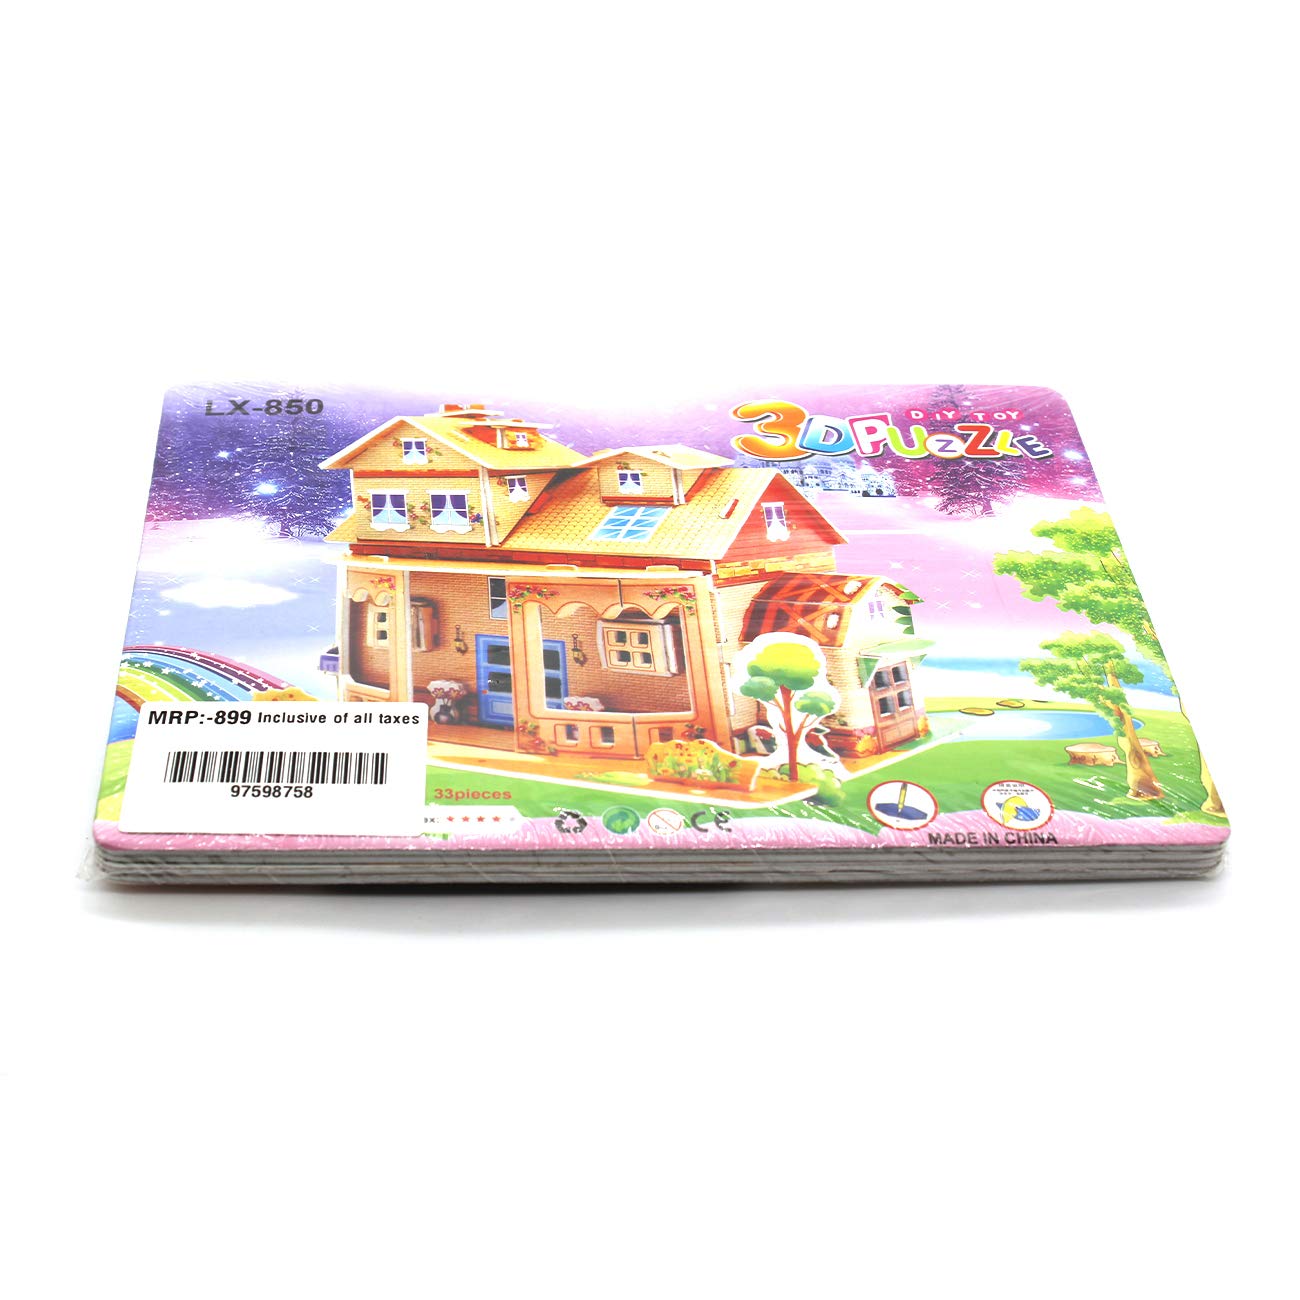 3D House Puzzle Game for Kids